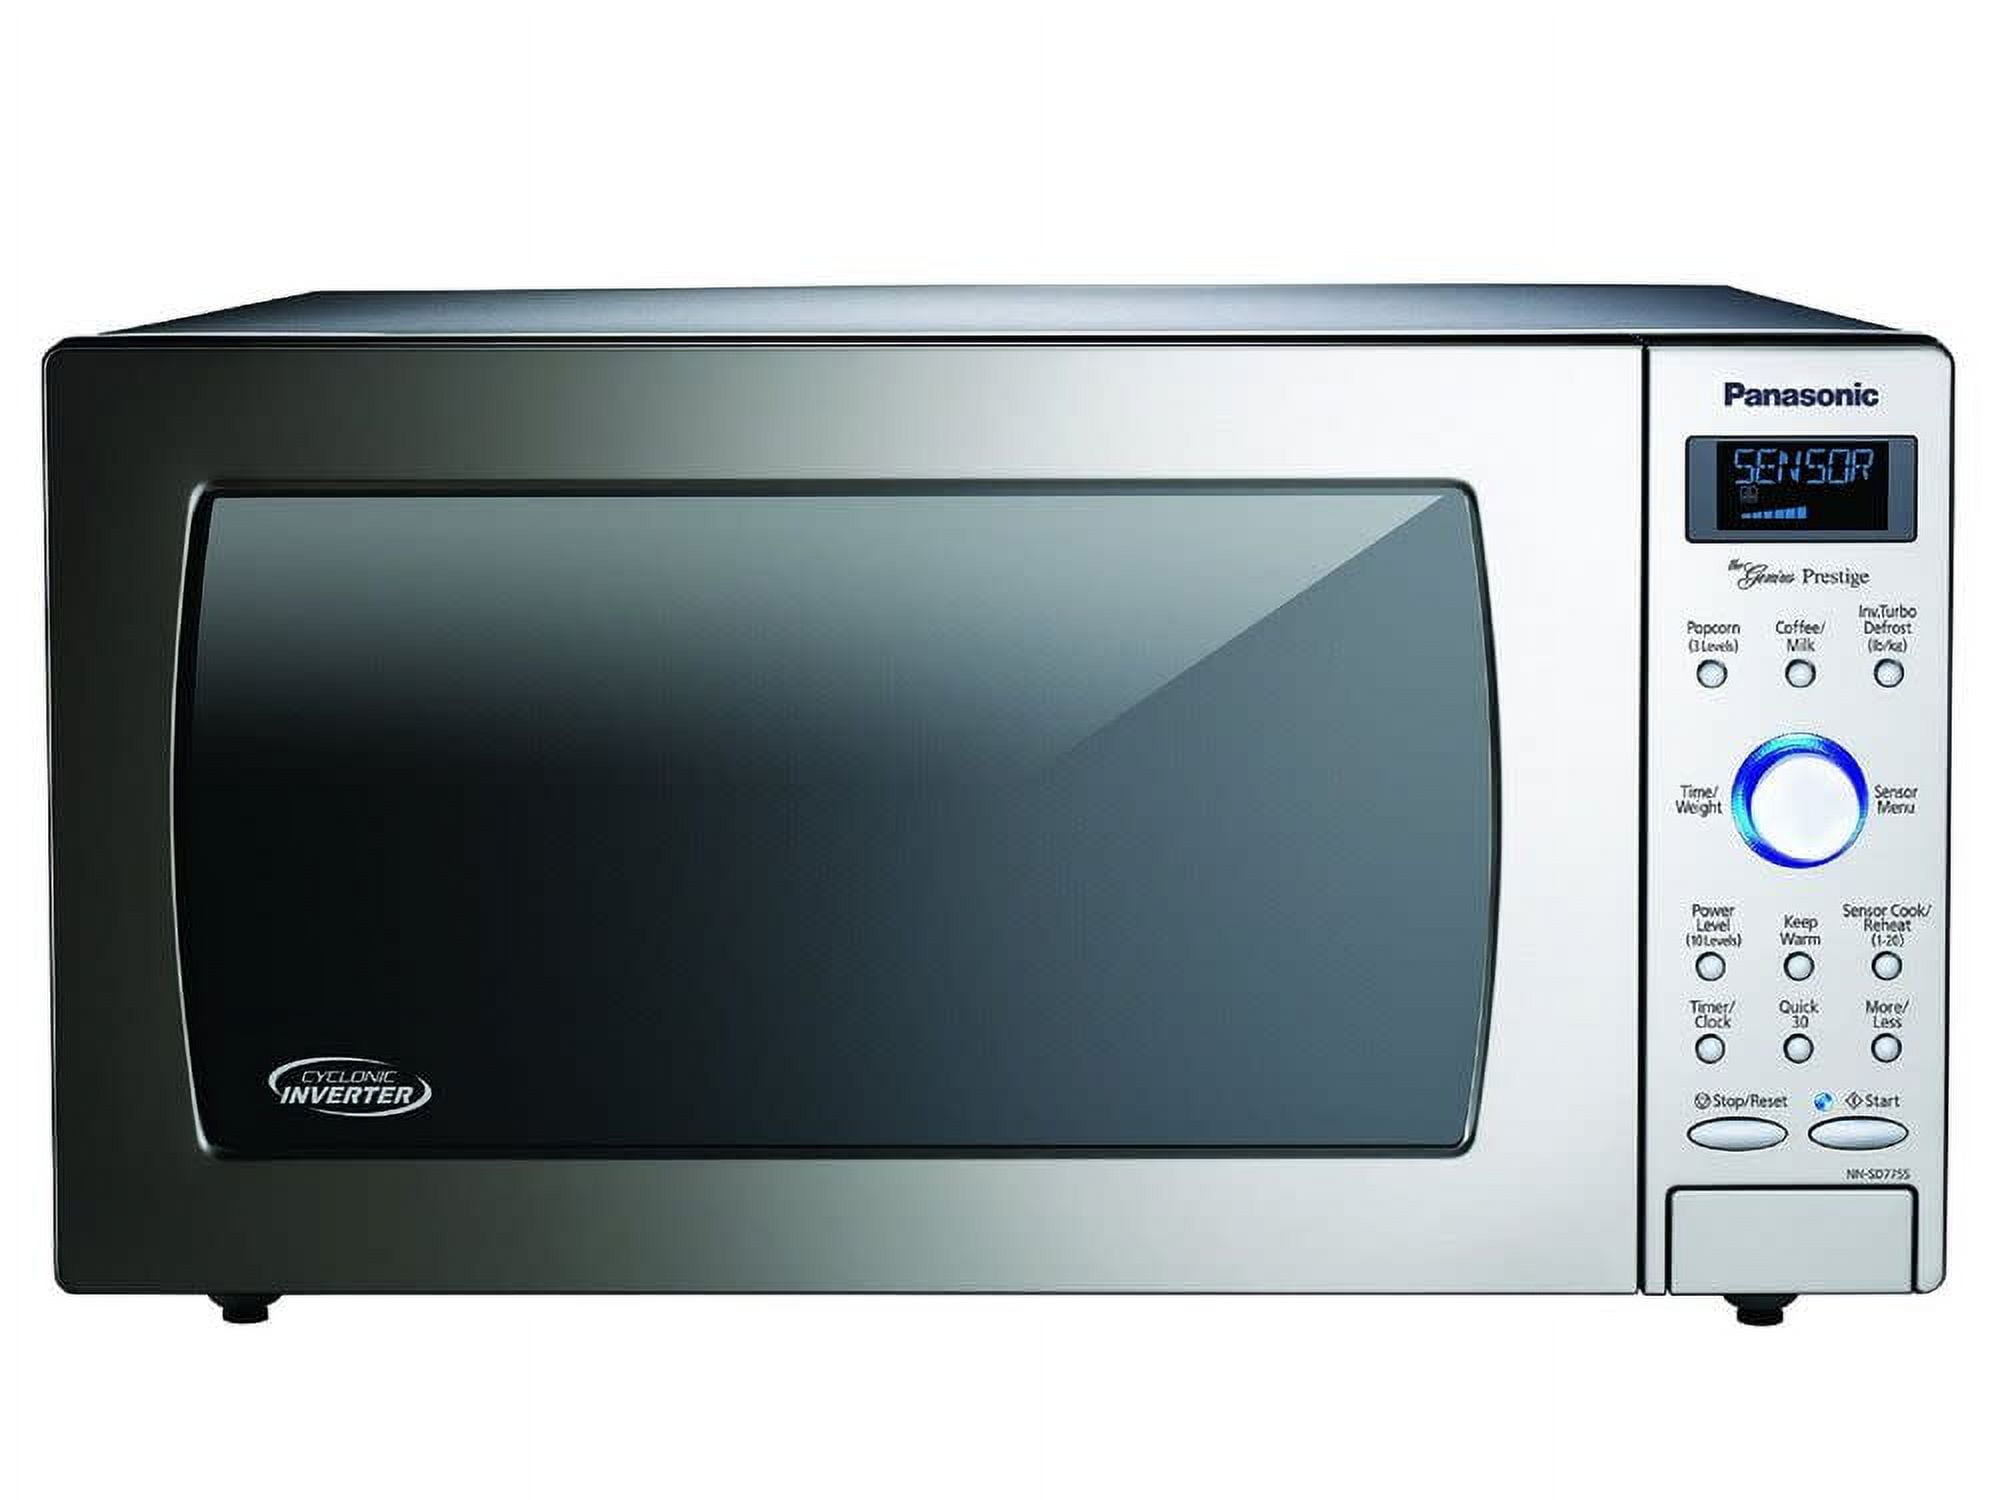 Nn-sd775s 1.6 Cu. Ft. Built-in & Countertop Cyclonic Wave Microwave Oven With Inverter Technology